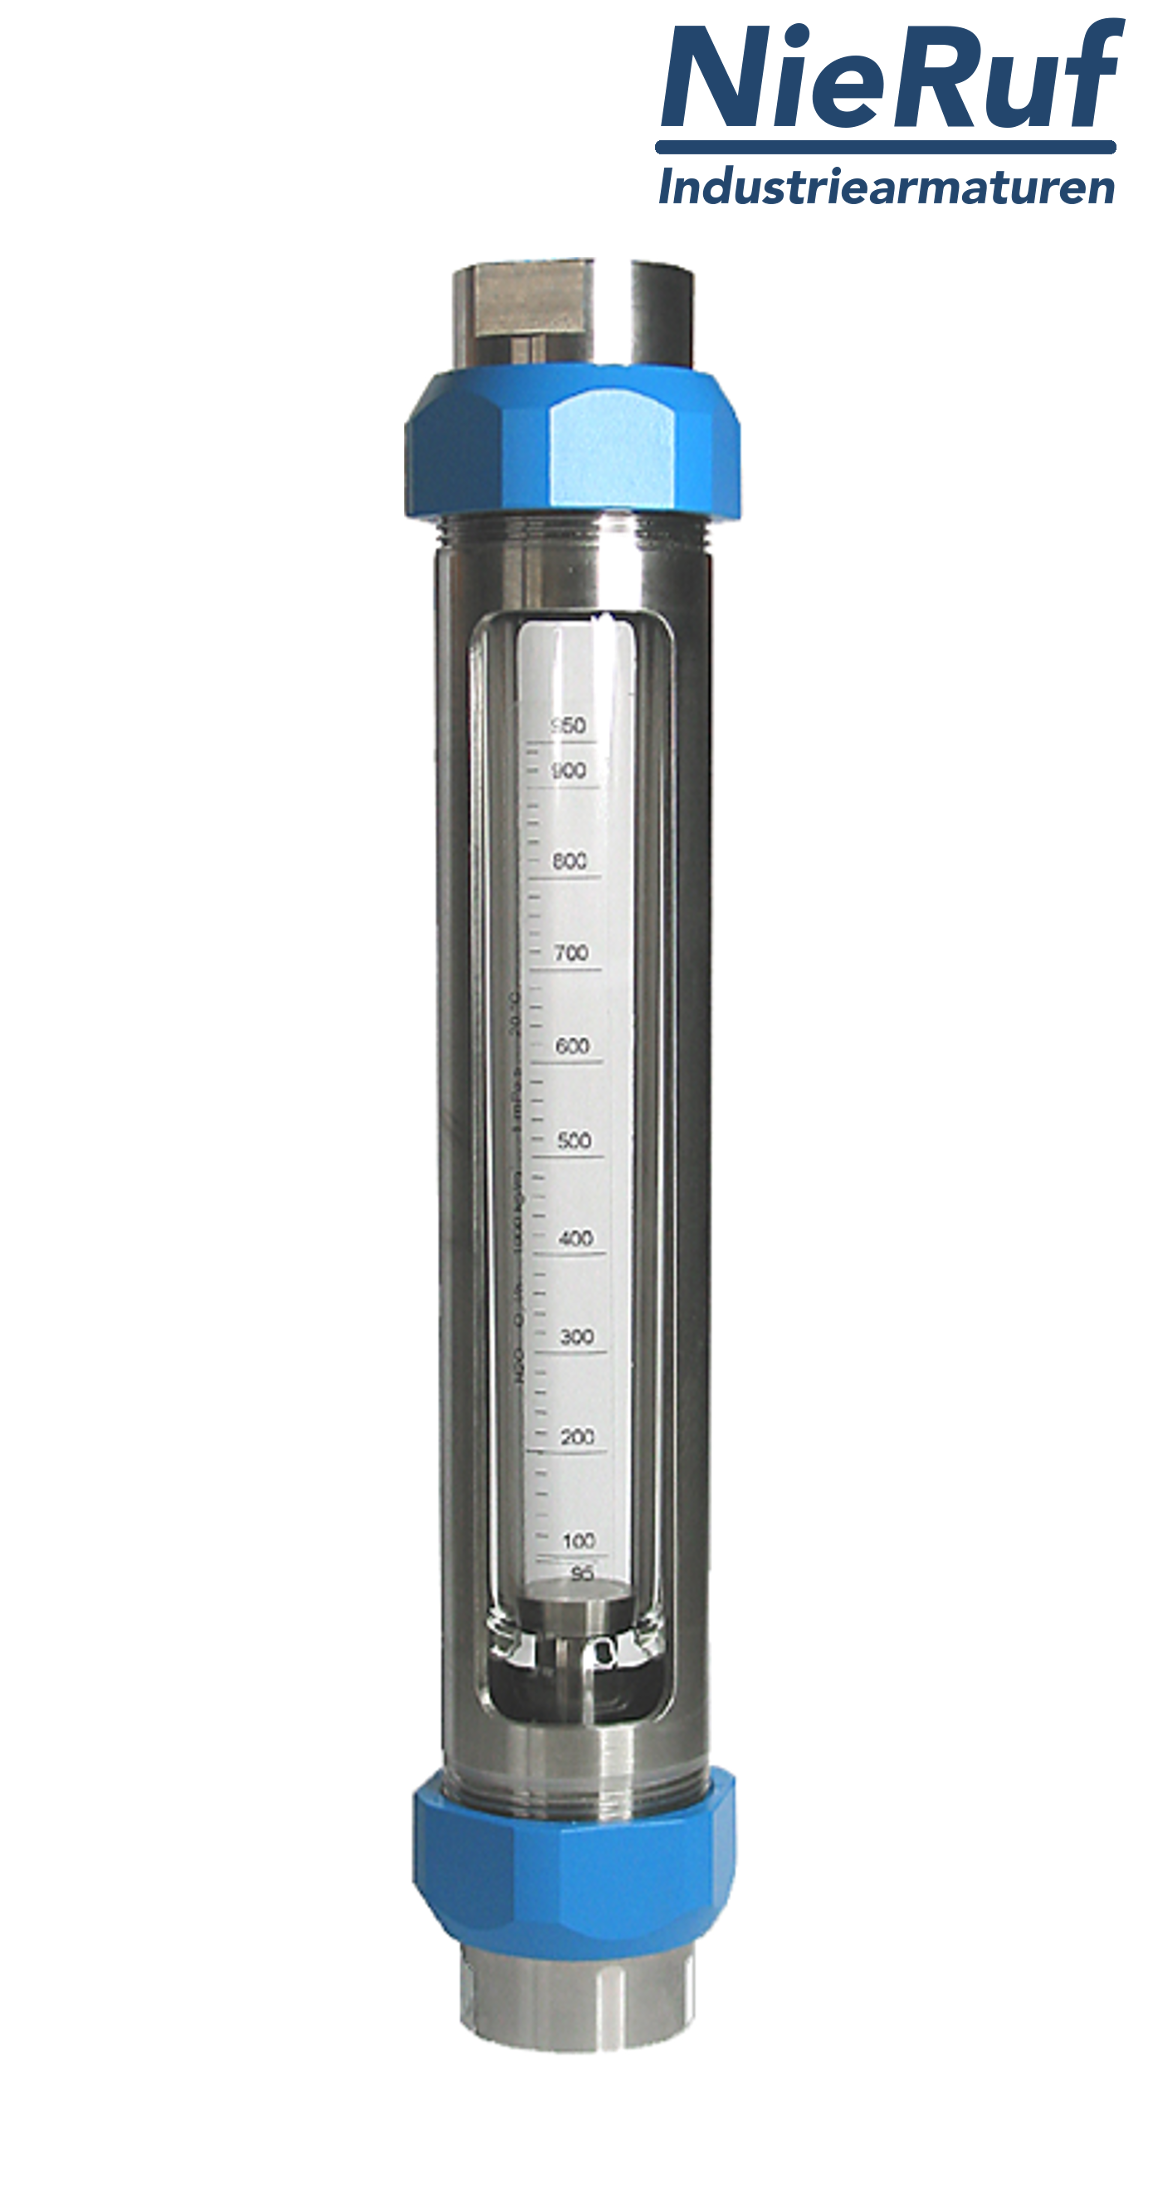 Variable area flowmeter stainless steel + borosilicate 3/4" inch 2800.0 - 28000.0 l/h air EPDM